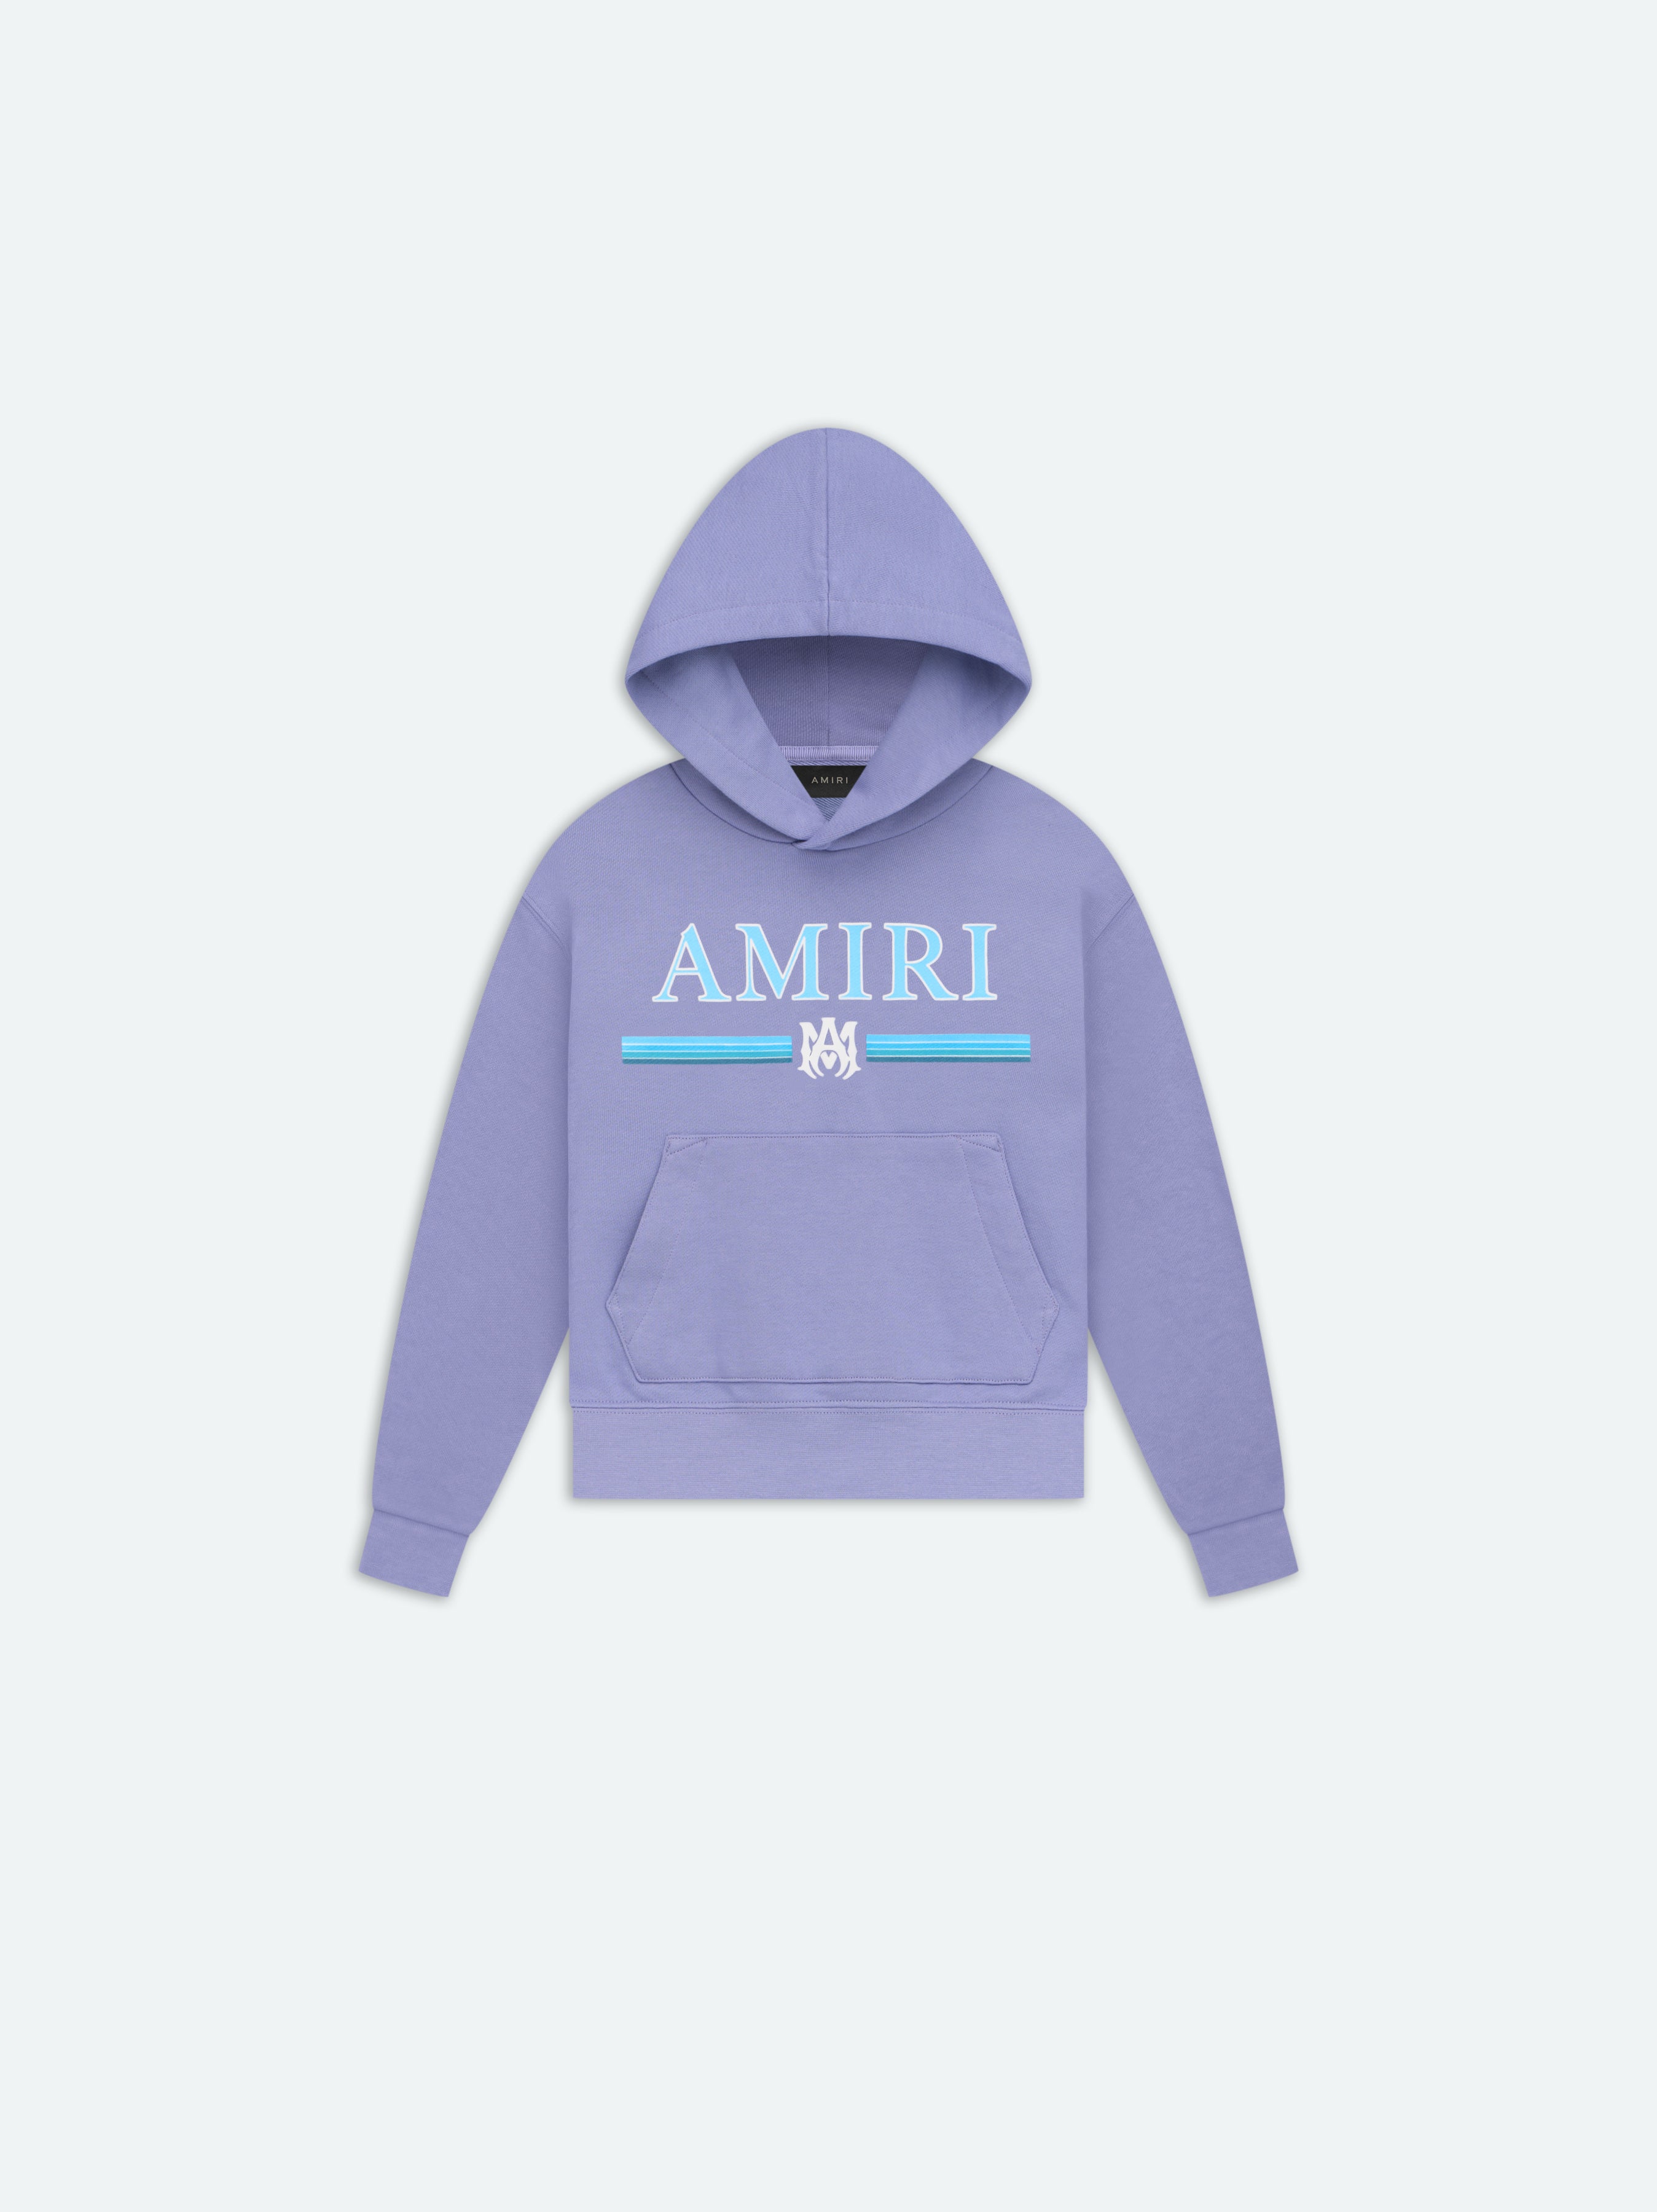 Product KIDS - Amiri MA Gradient Bar Hoodie - Persian Violet featured image